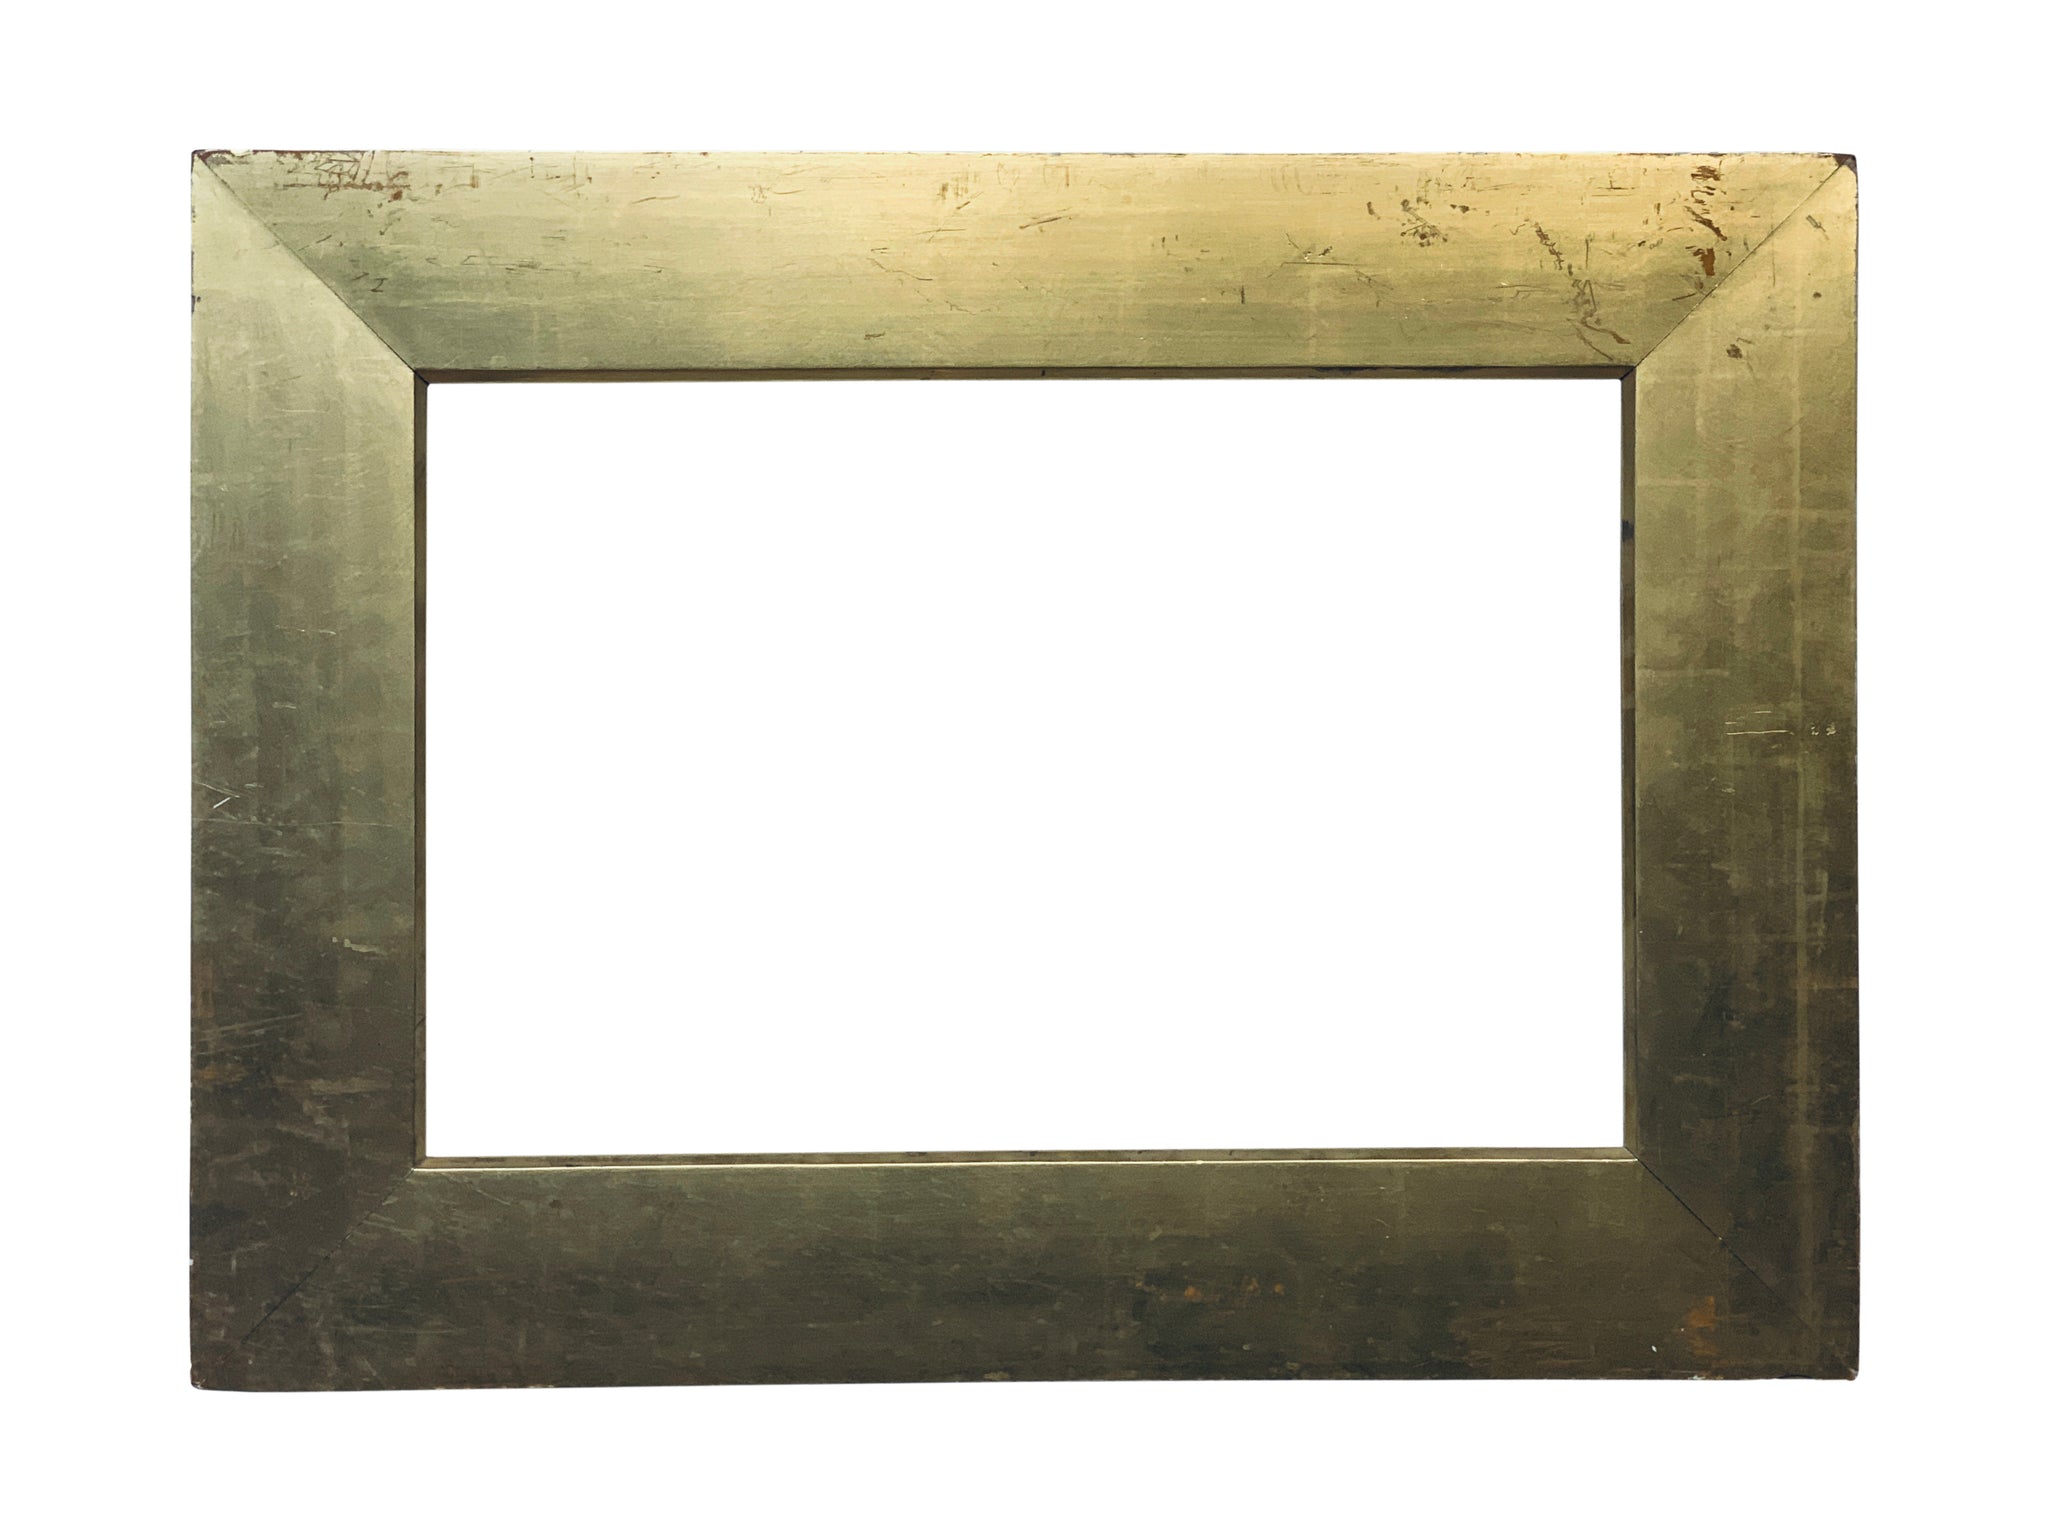 13x22 Inch Antique Gold Picture Frame for canvas art circa 1800s (19th Century American painting frame for sale).